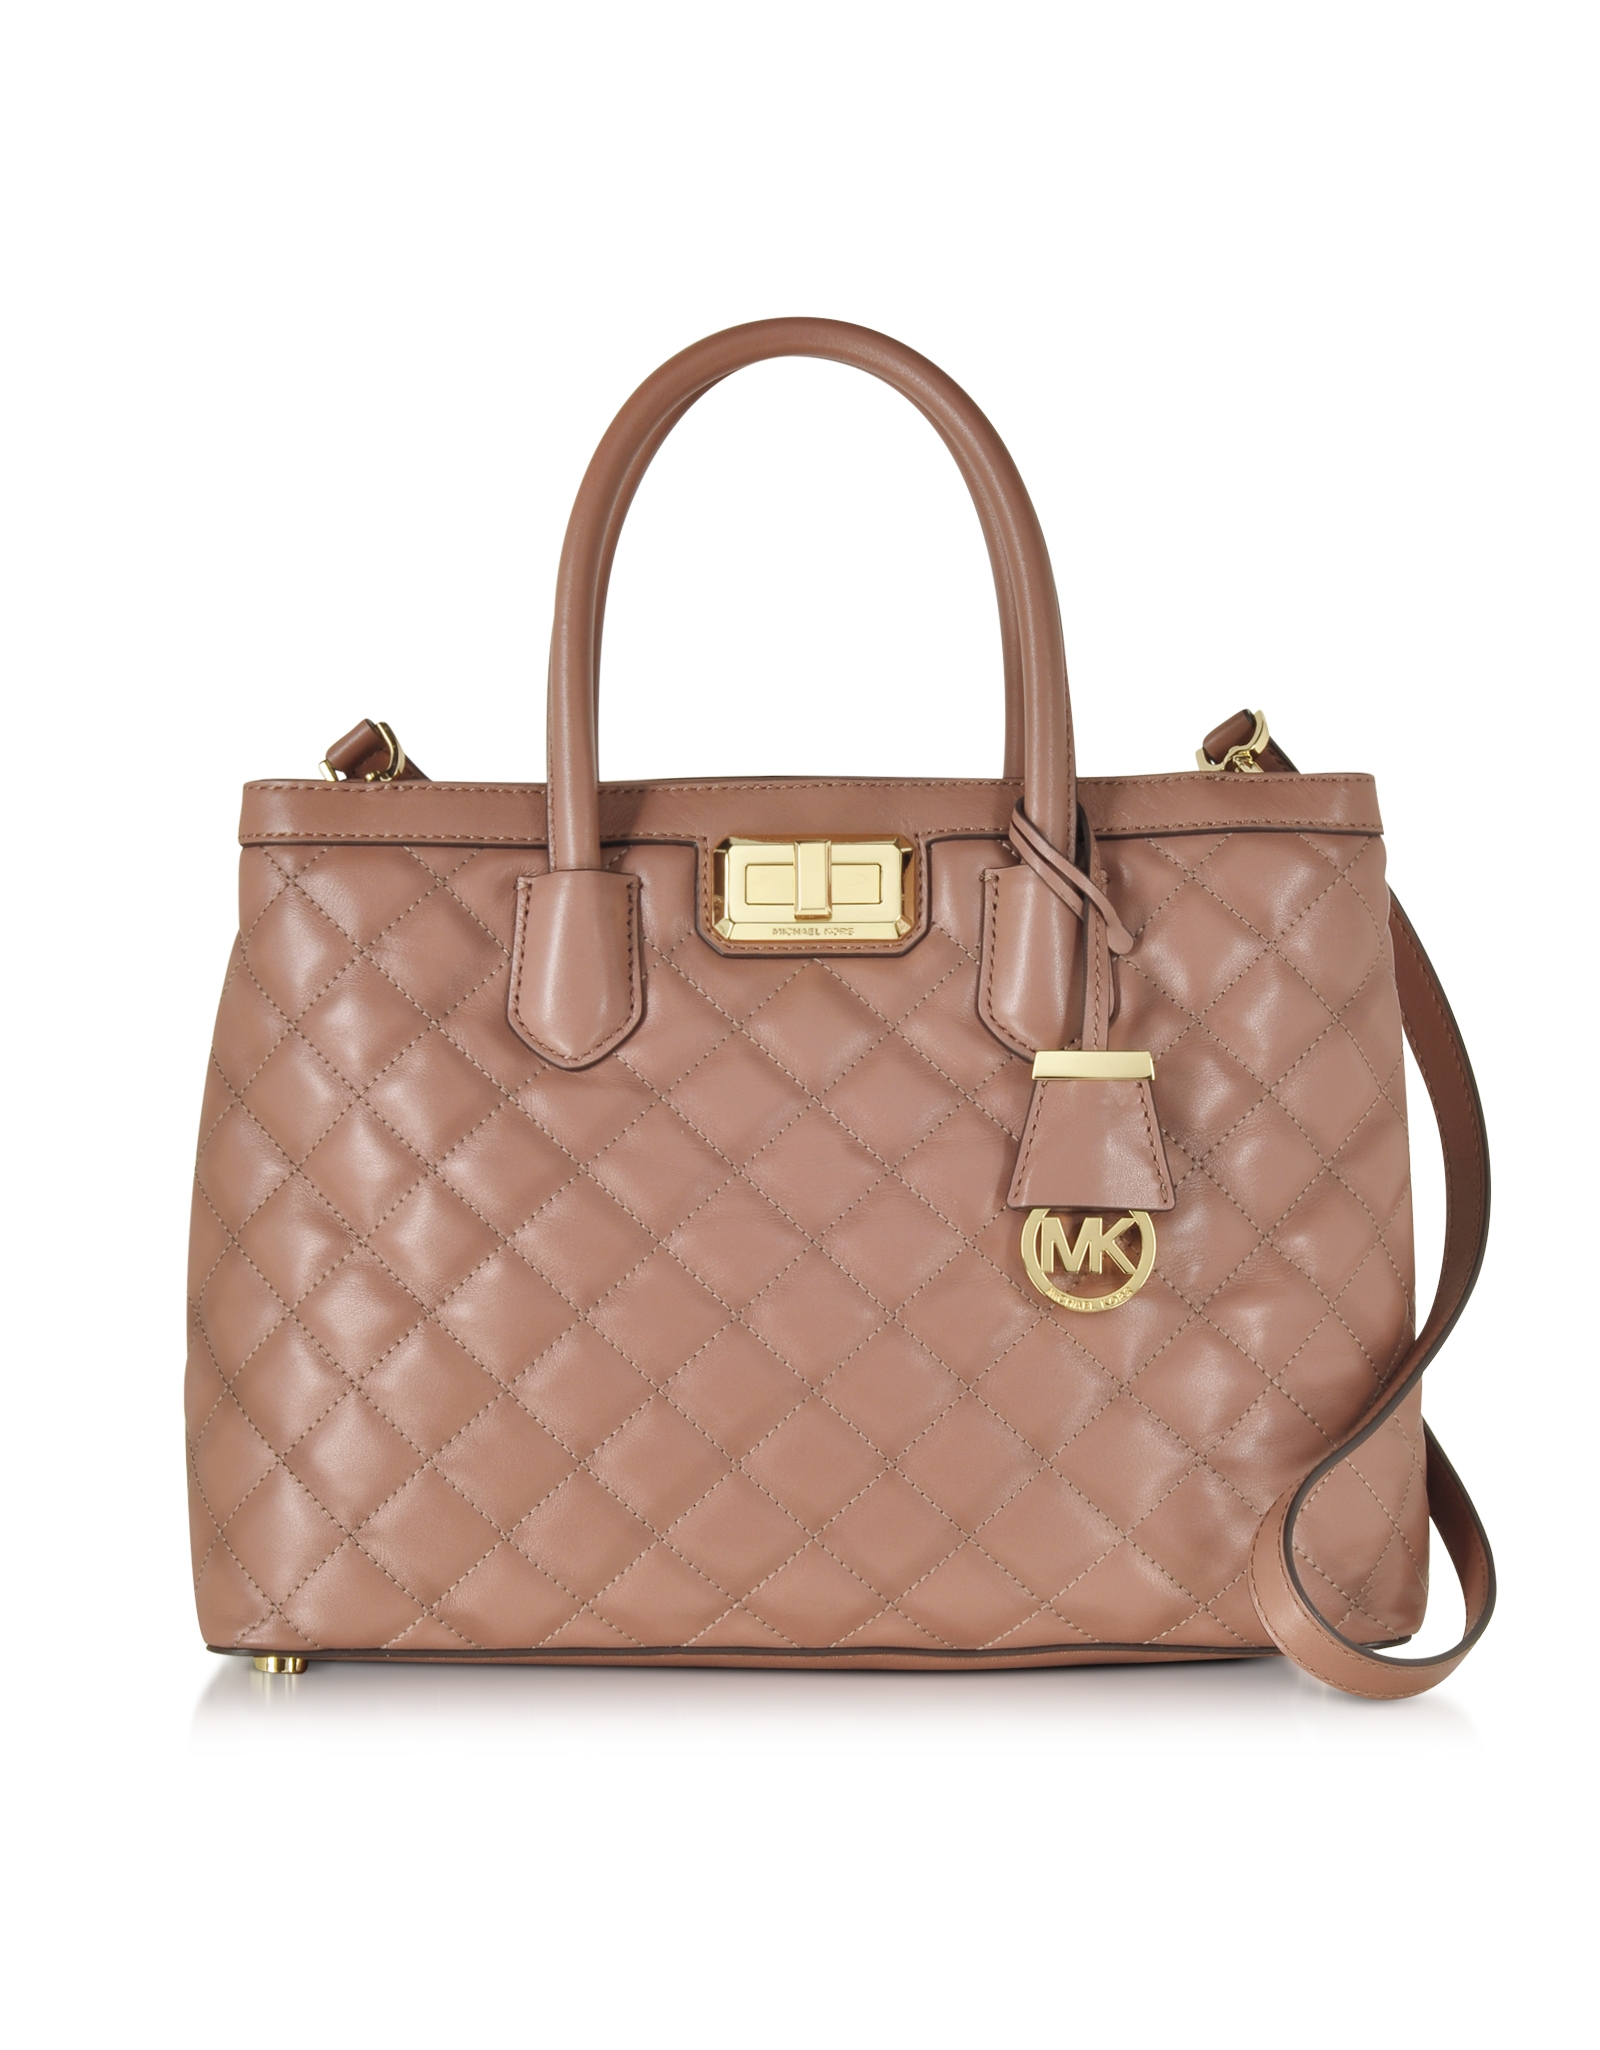 Lyst - Michael Kors Hannah Quilted Satchel in Pink